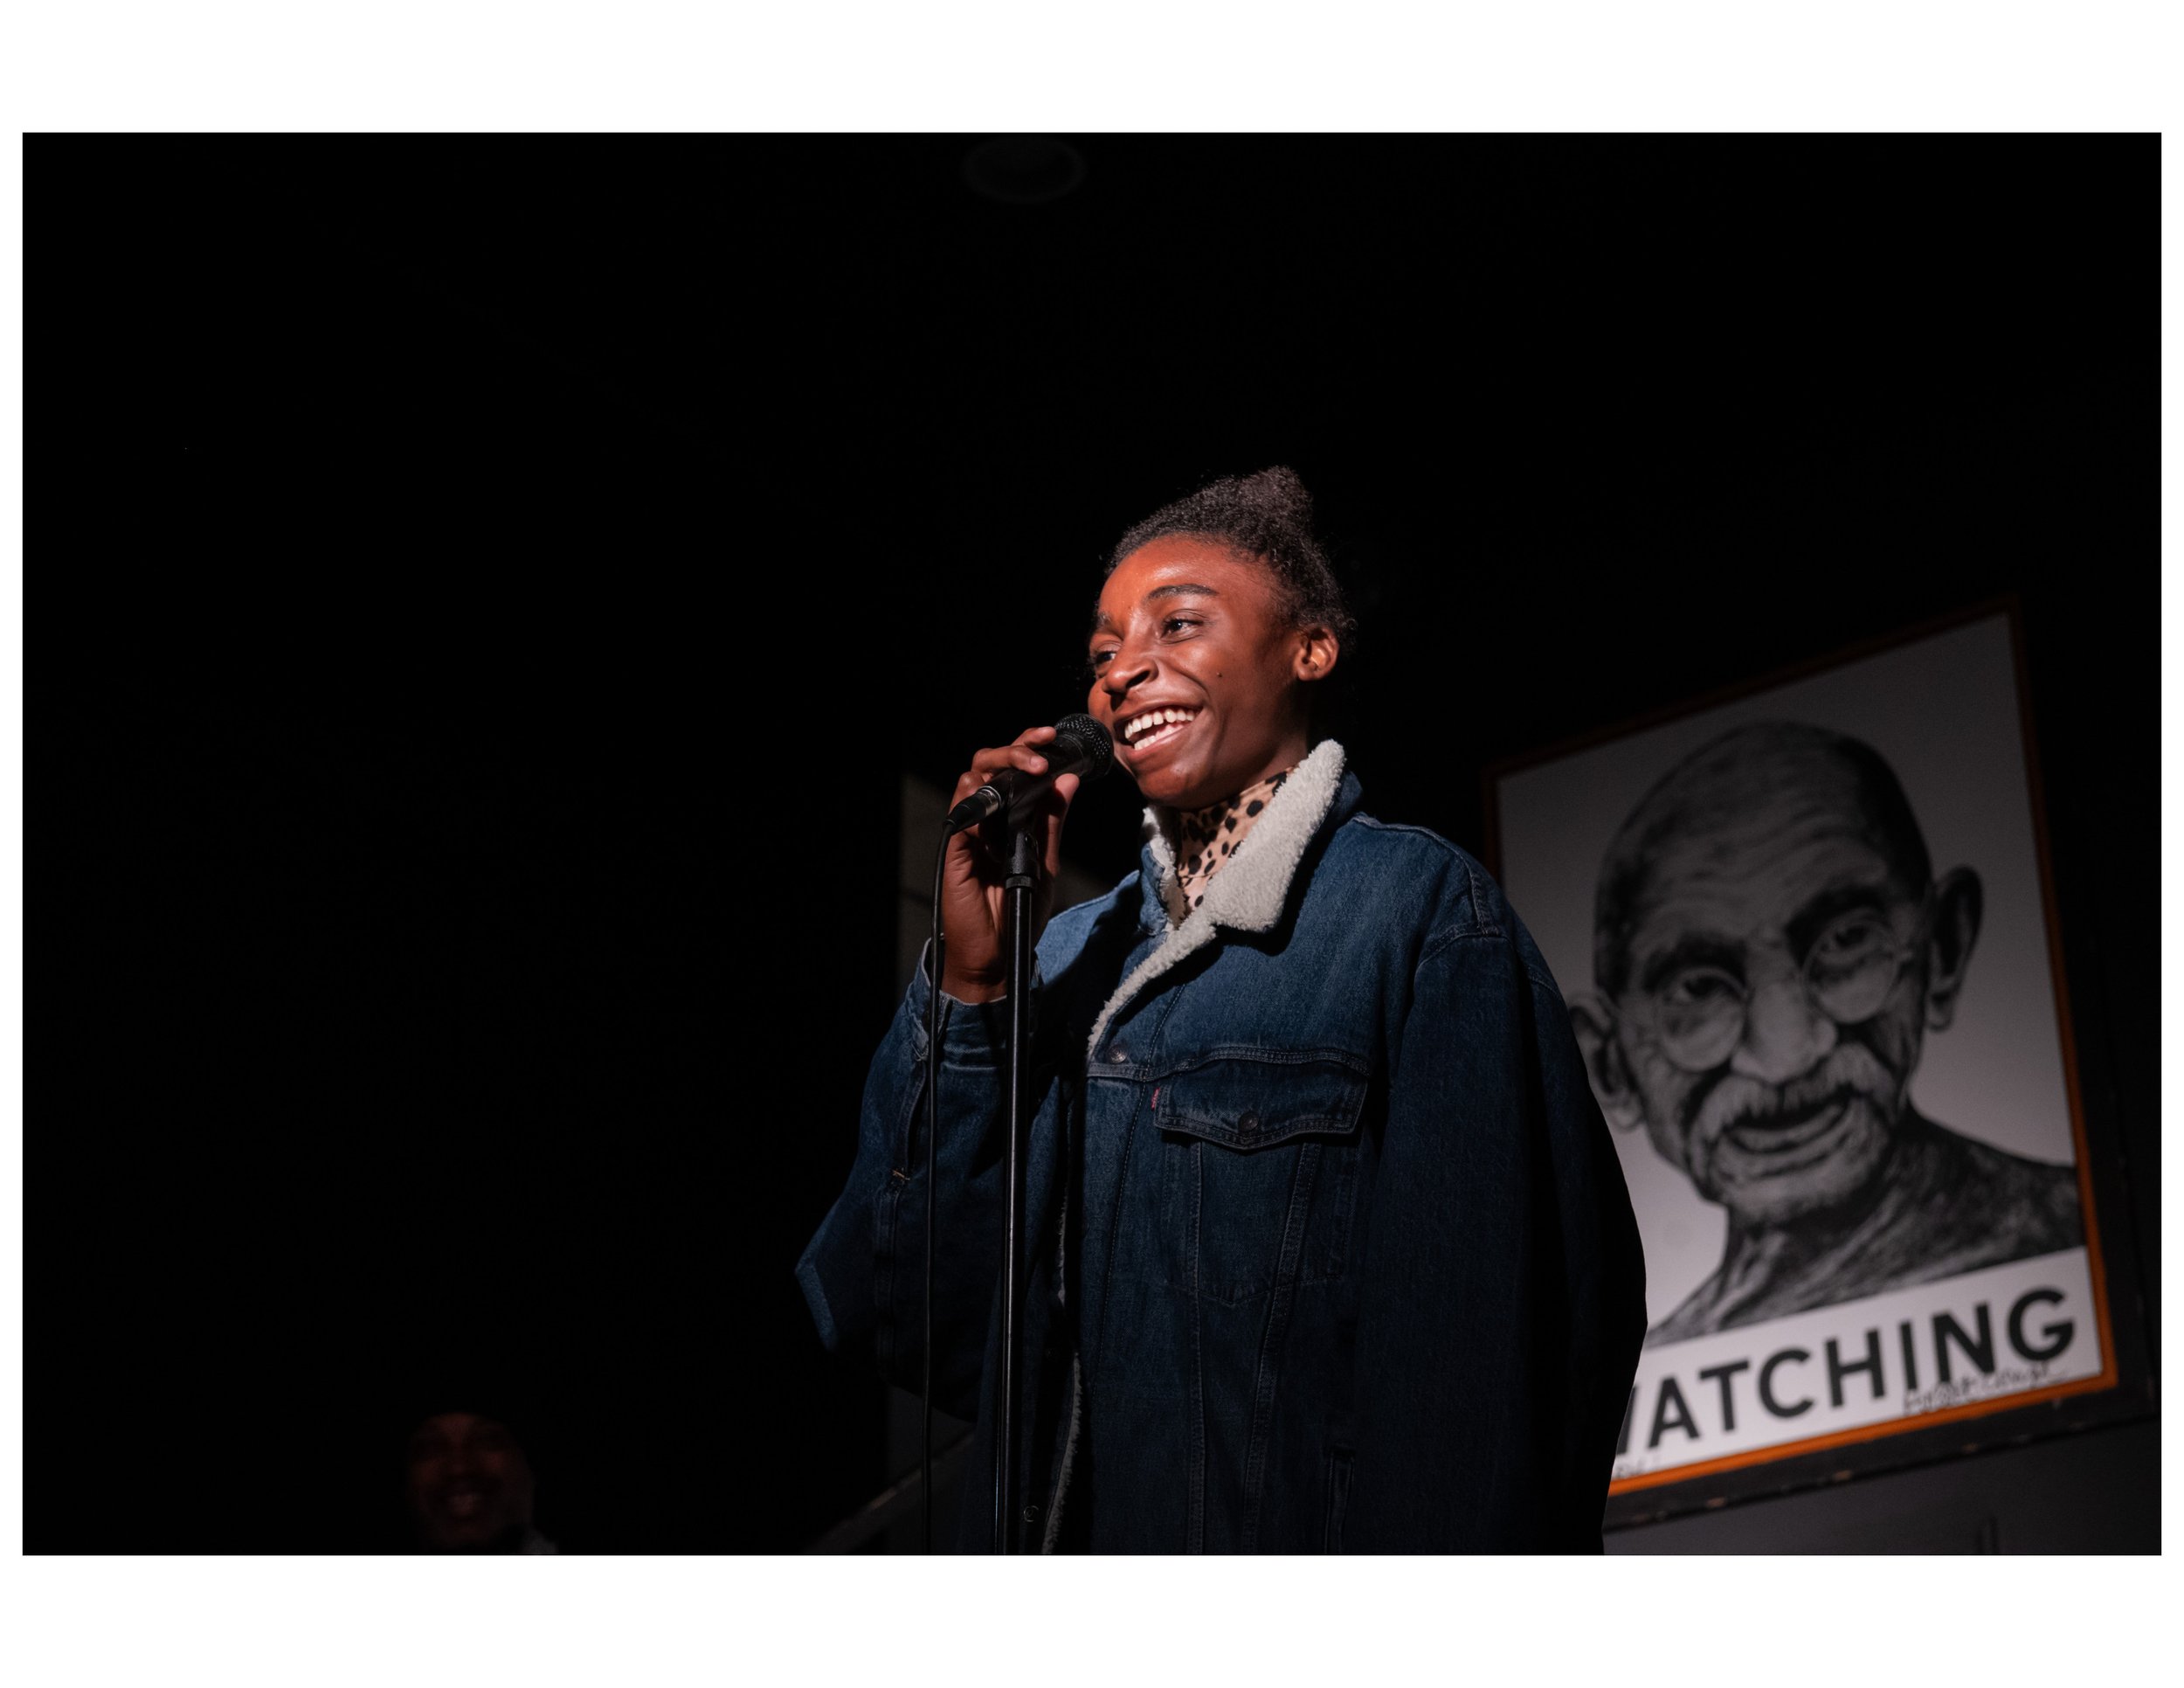   Youth Poet performs original poem at an open mic event hosted by Words Beats &amp; Life Inc. at Busboys and Poets in Washington, DC. Photographer/Victoria Ford  